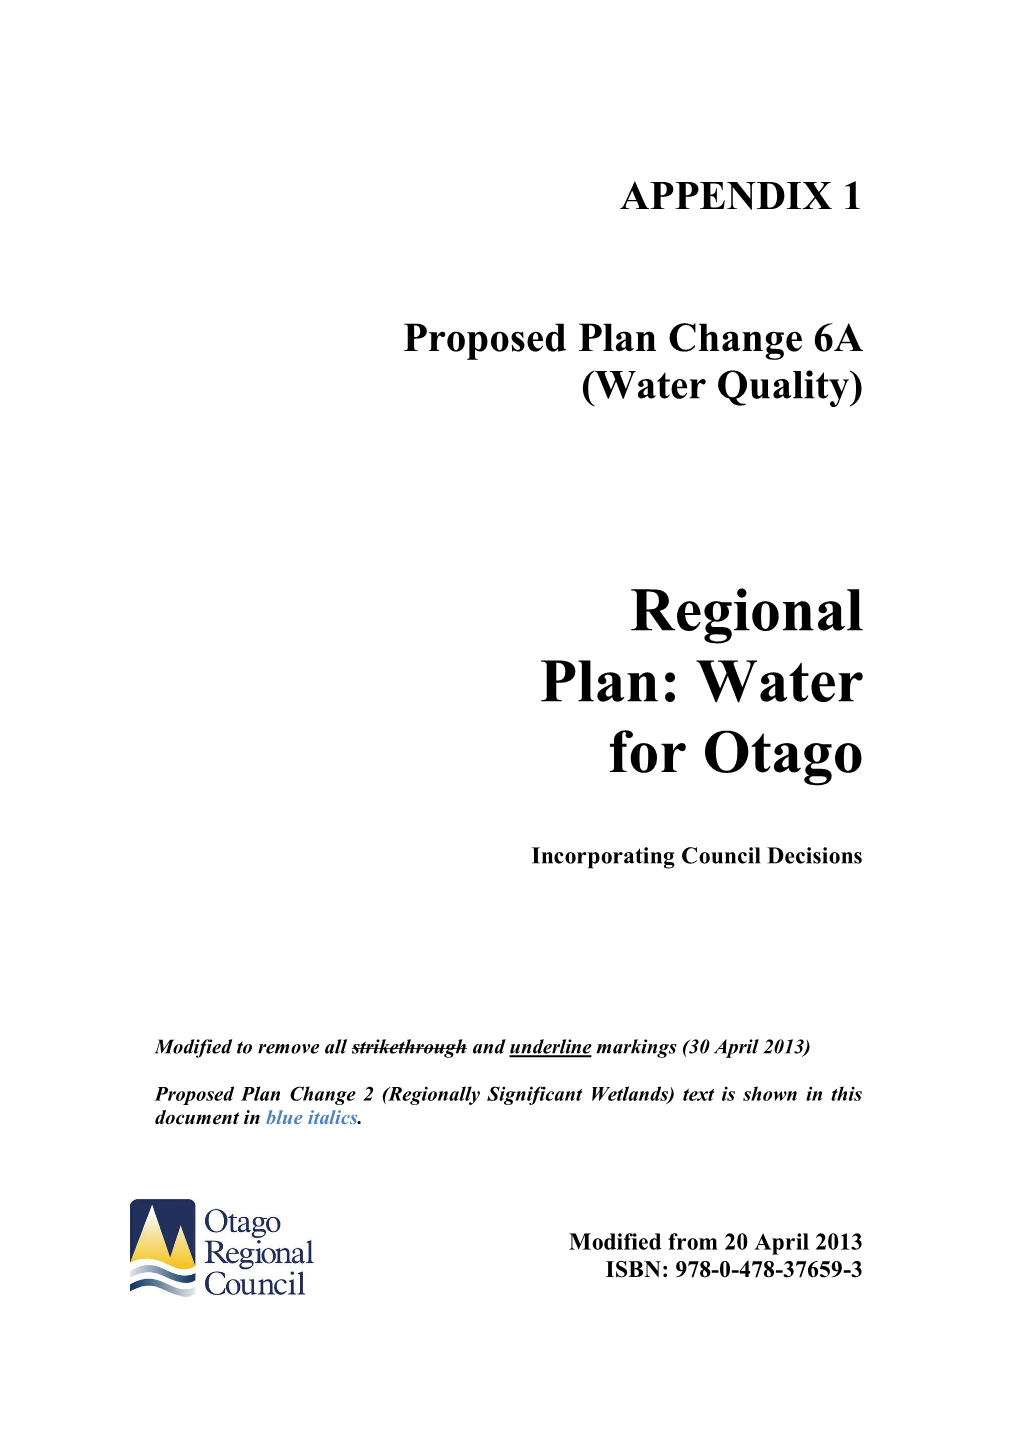 APPENDIX 1 Proposed Plan Change 6A (Water Quality)